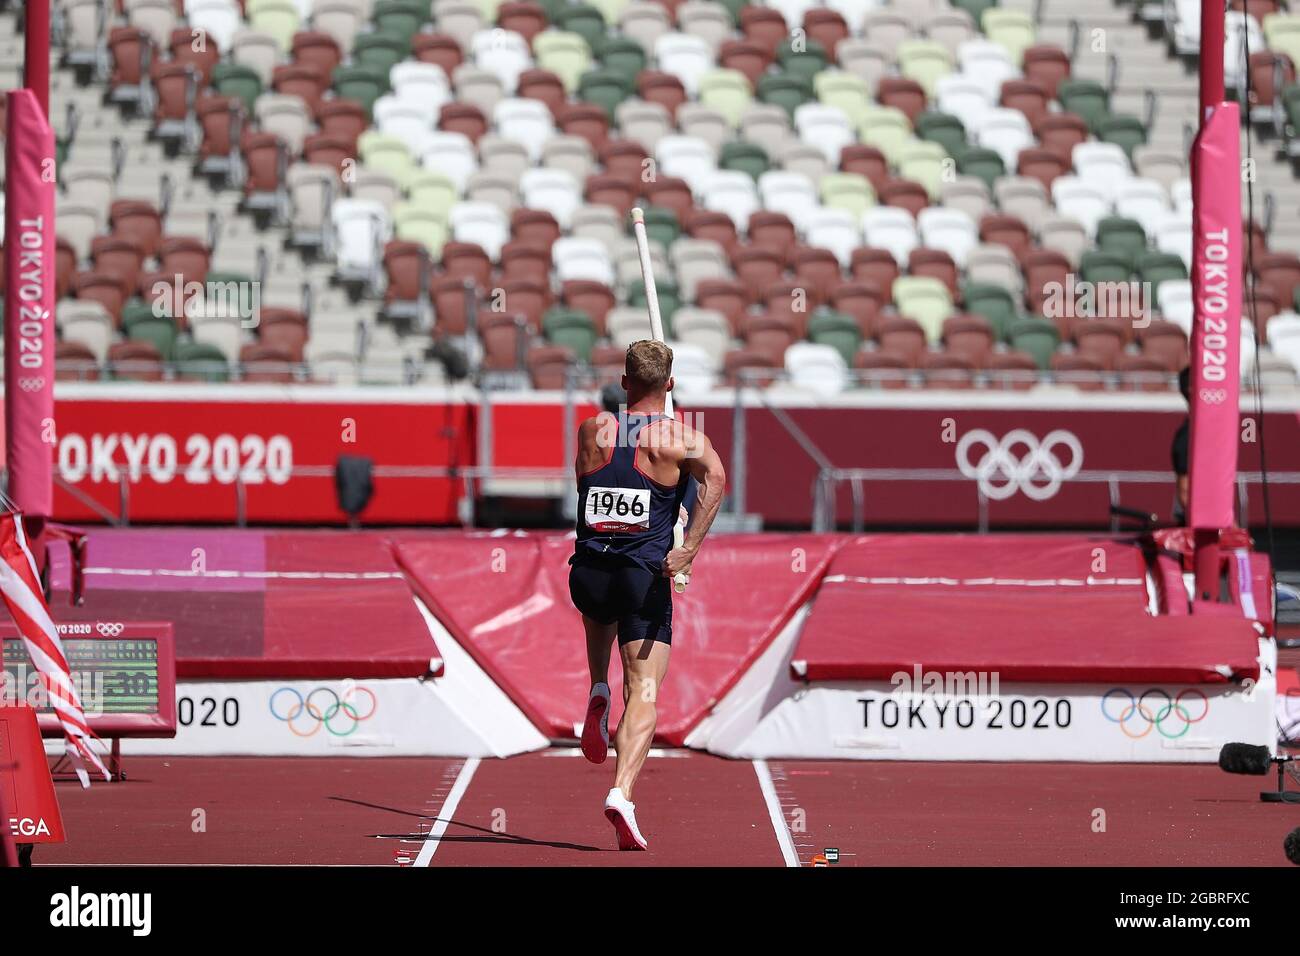 Tokyo, Japan. 5th Aug, 2021. Kevin Mayer of France competes during the Men's Decathlon Pole Vault at the Tokyo 2020 Olympic Games in Tokyo, Japan, Aug. 5, 2021. Credit: Li Ming/Xinhua/Alamy Live News Stock Photo